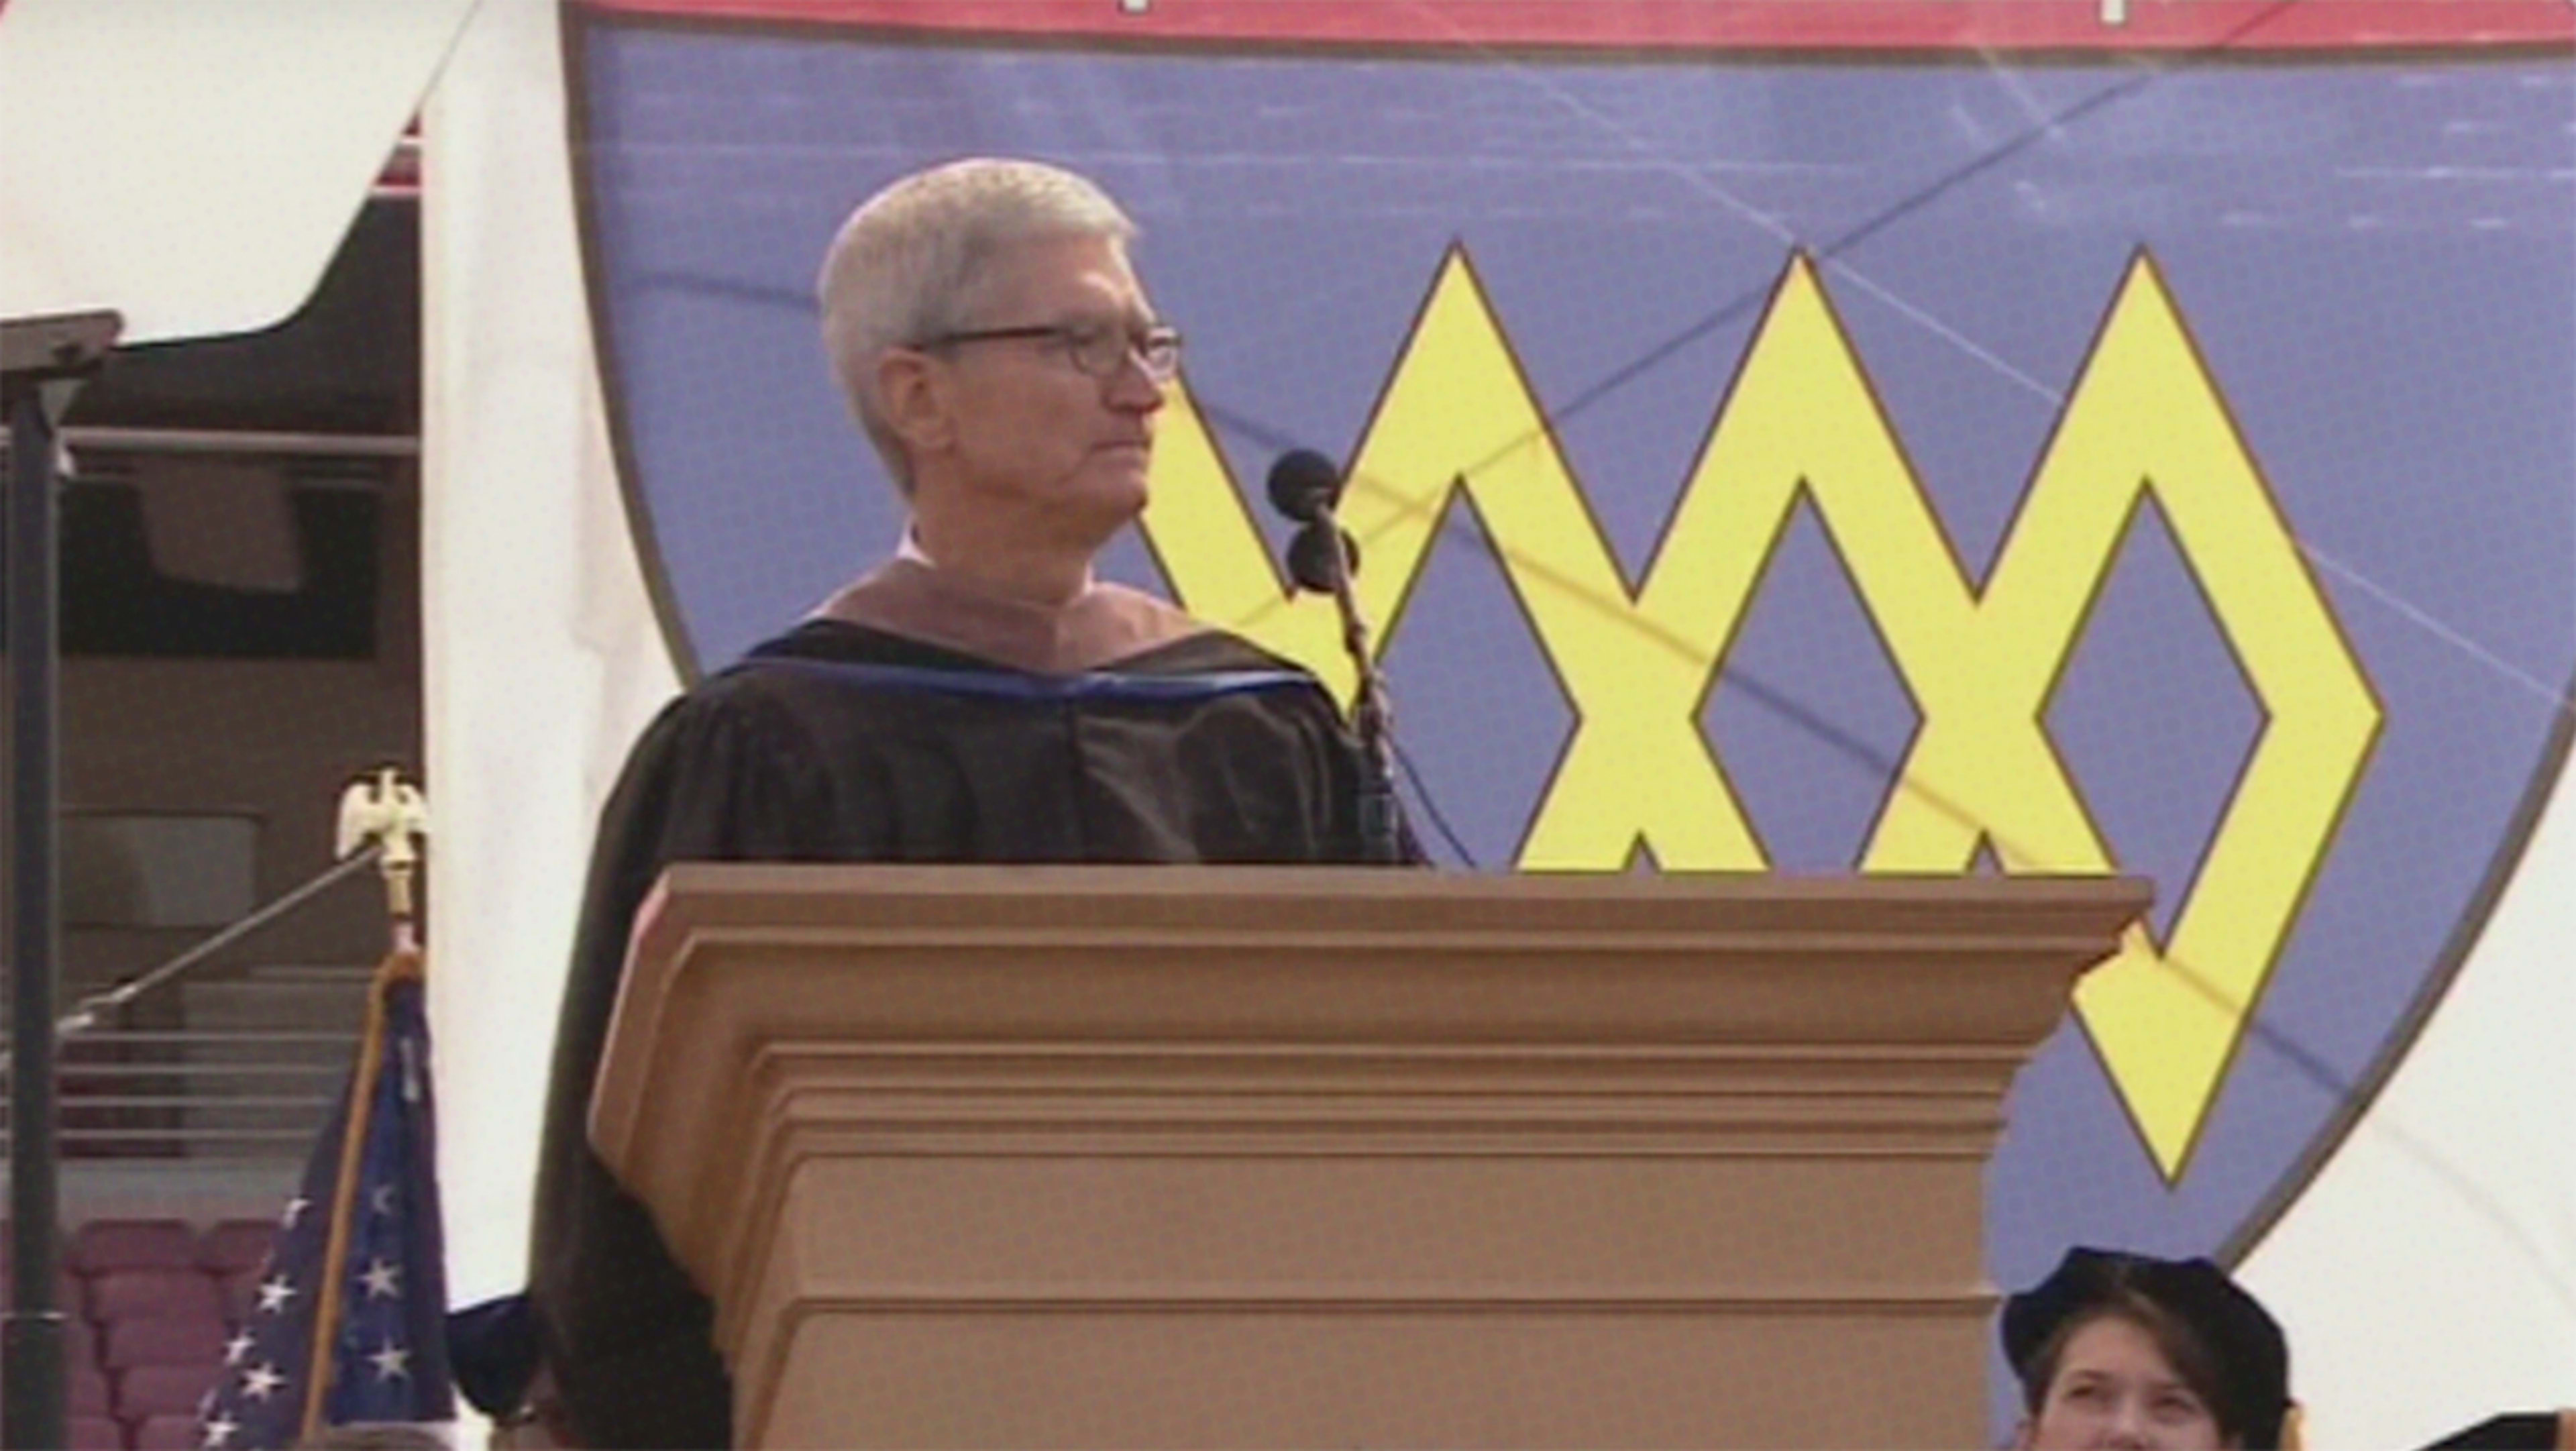 Watch Tim Cook warn Stanford graduates of the “chilling effect of digital surveillance”